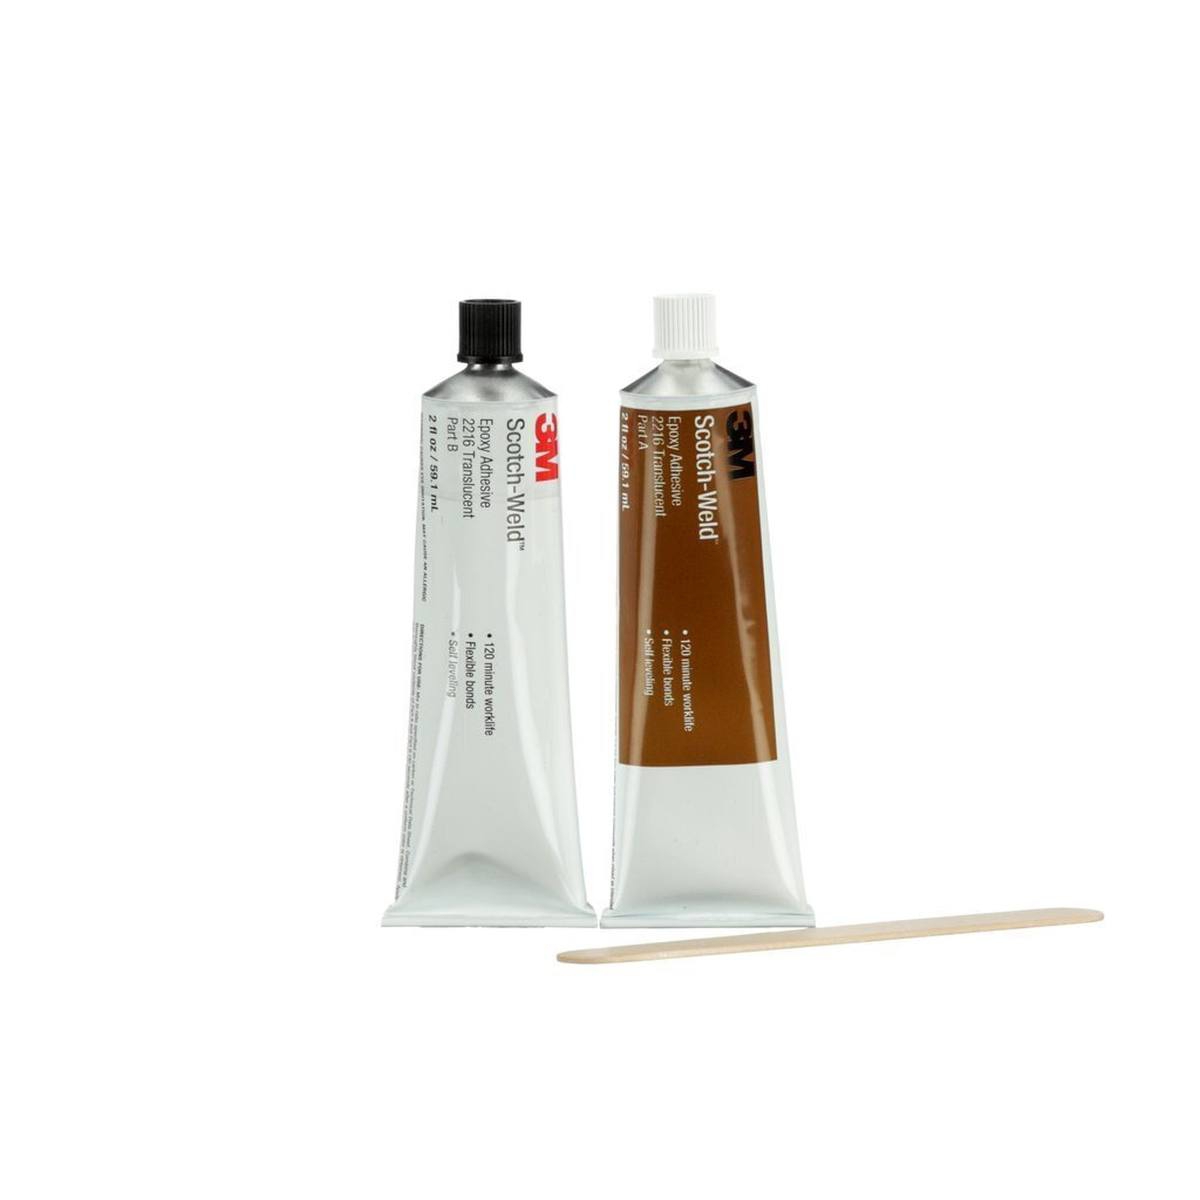 3M Scotch-Weld 2-component construction adhesive based on epoxy resin 2216 B/A, translucent, 59 ml